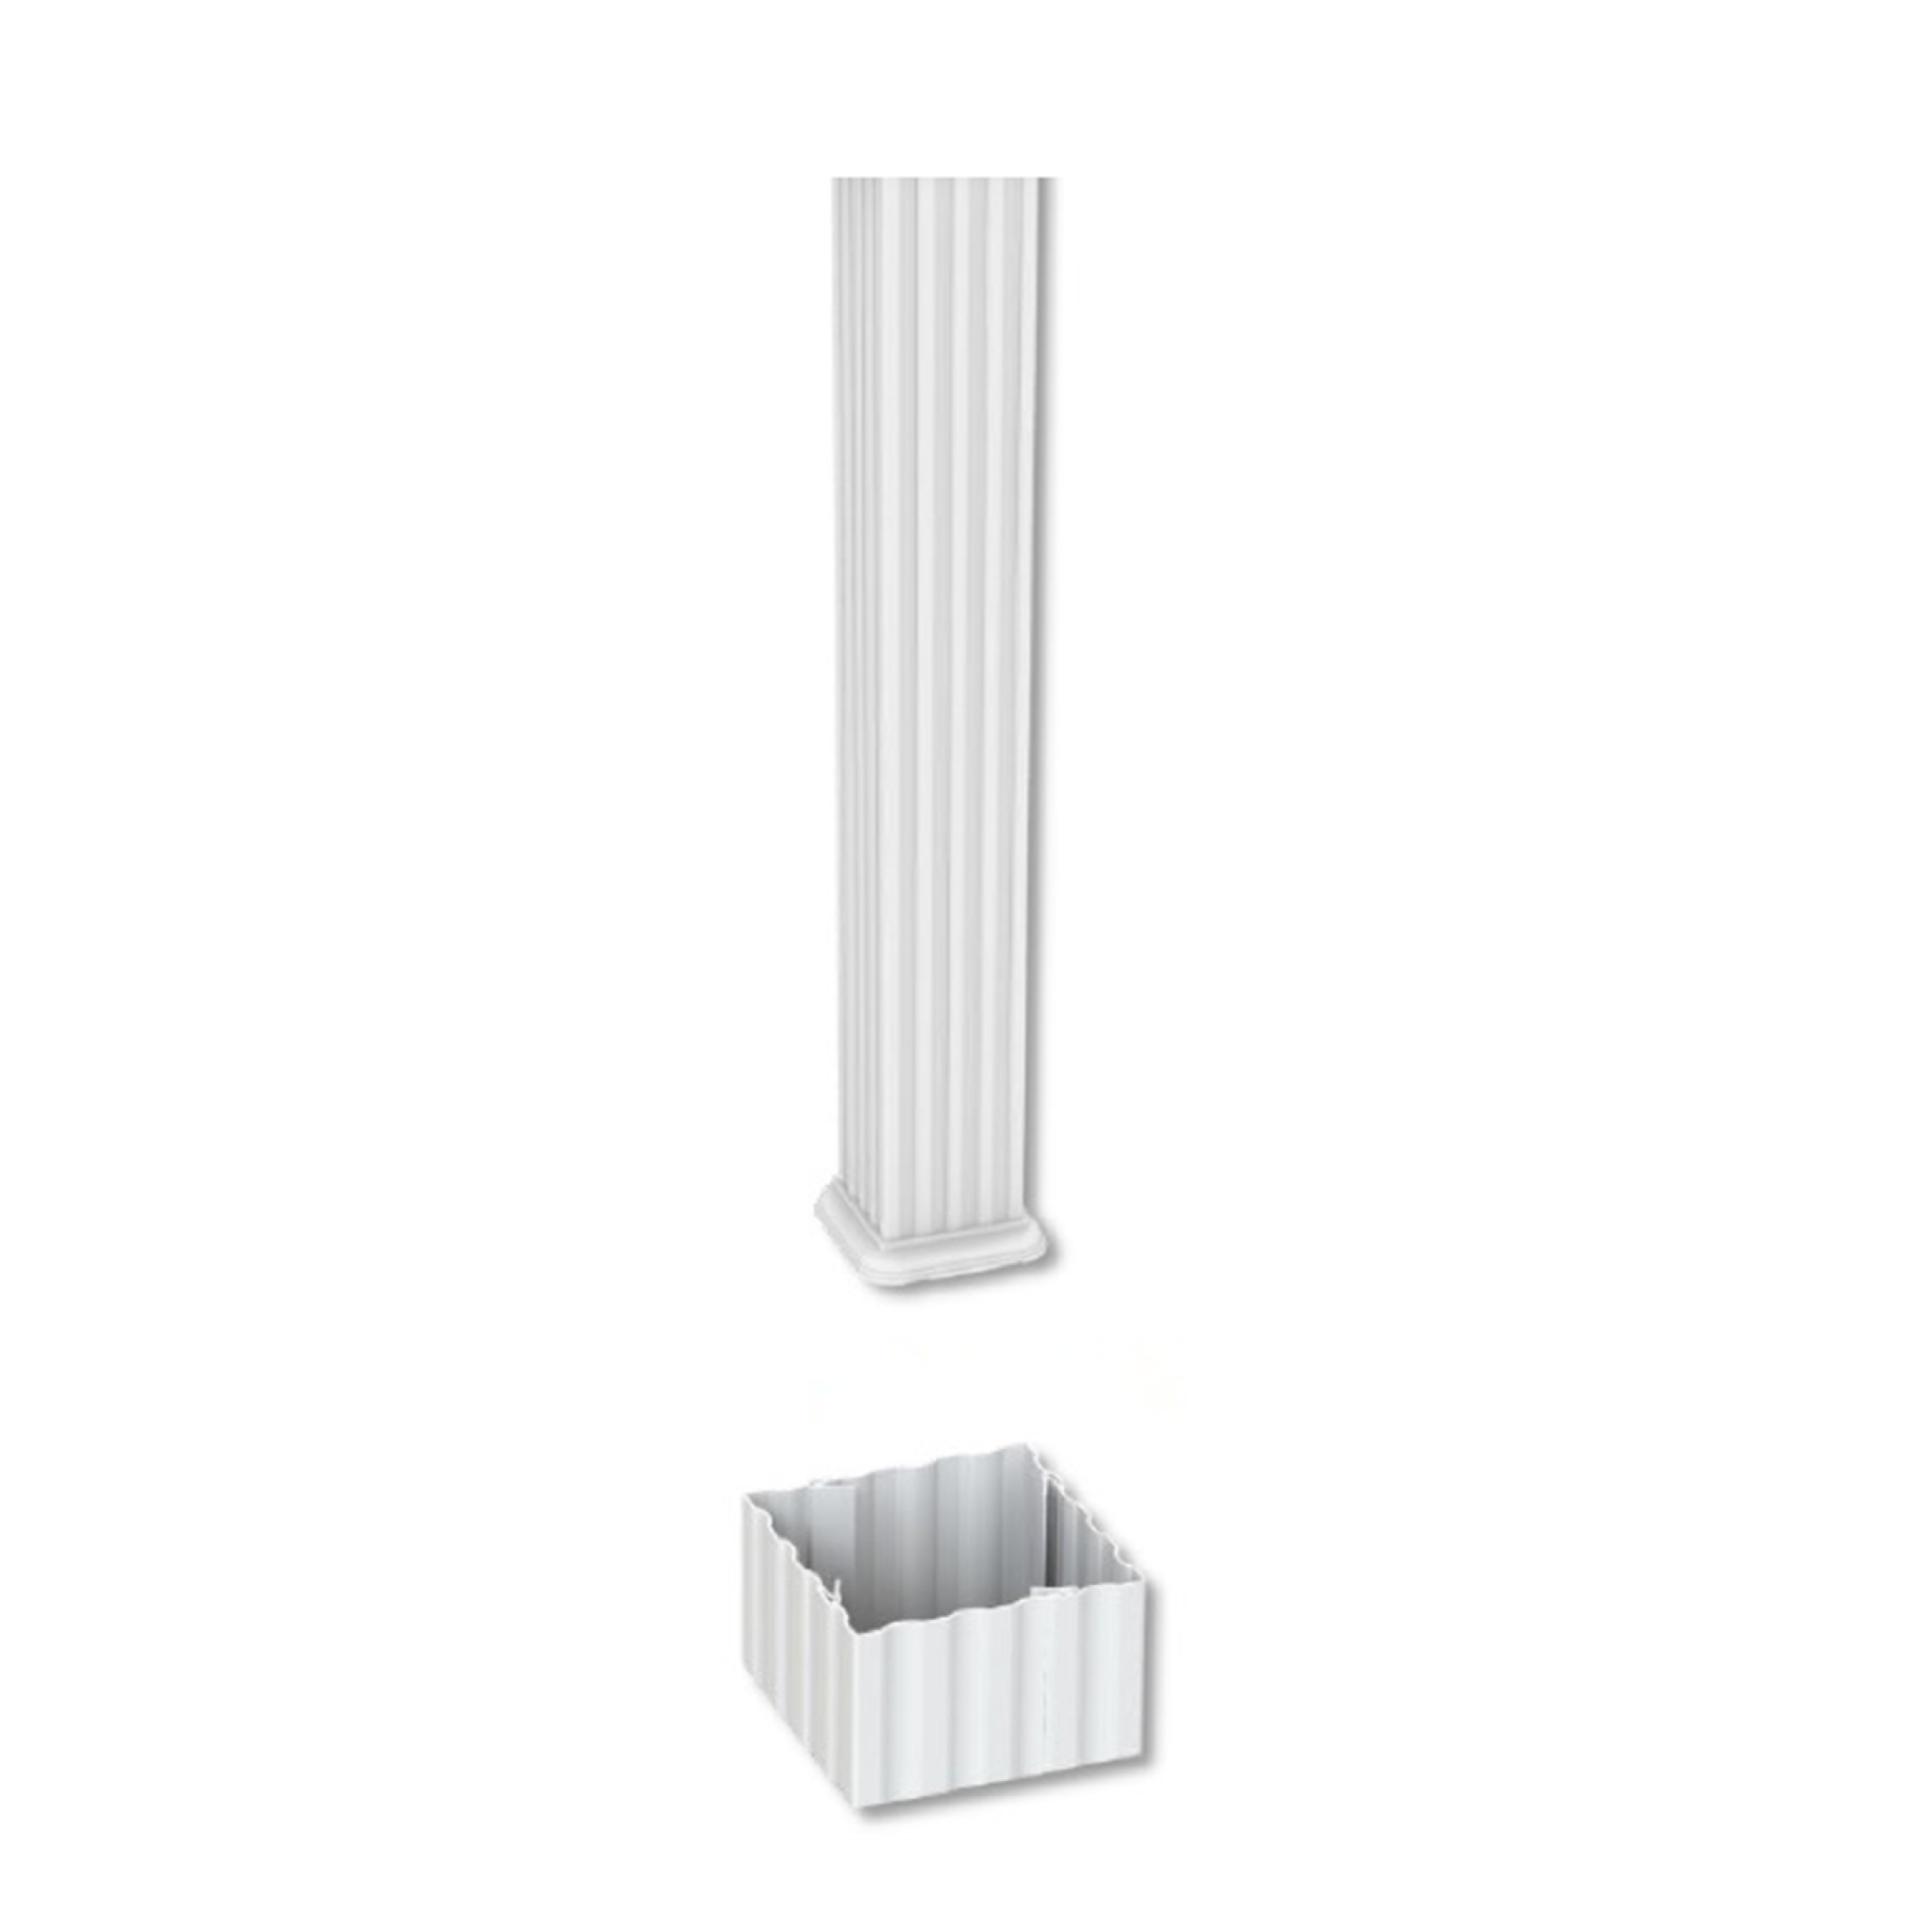 6"x9' Square Fluted Column